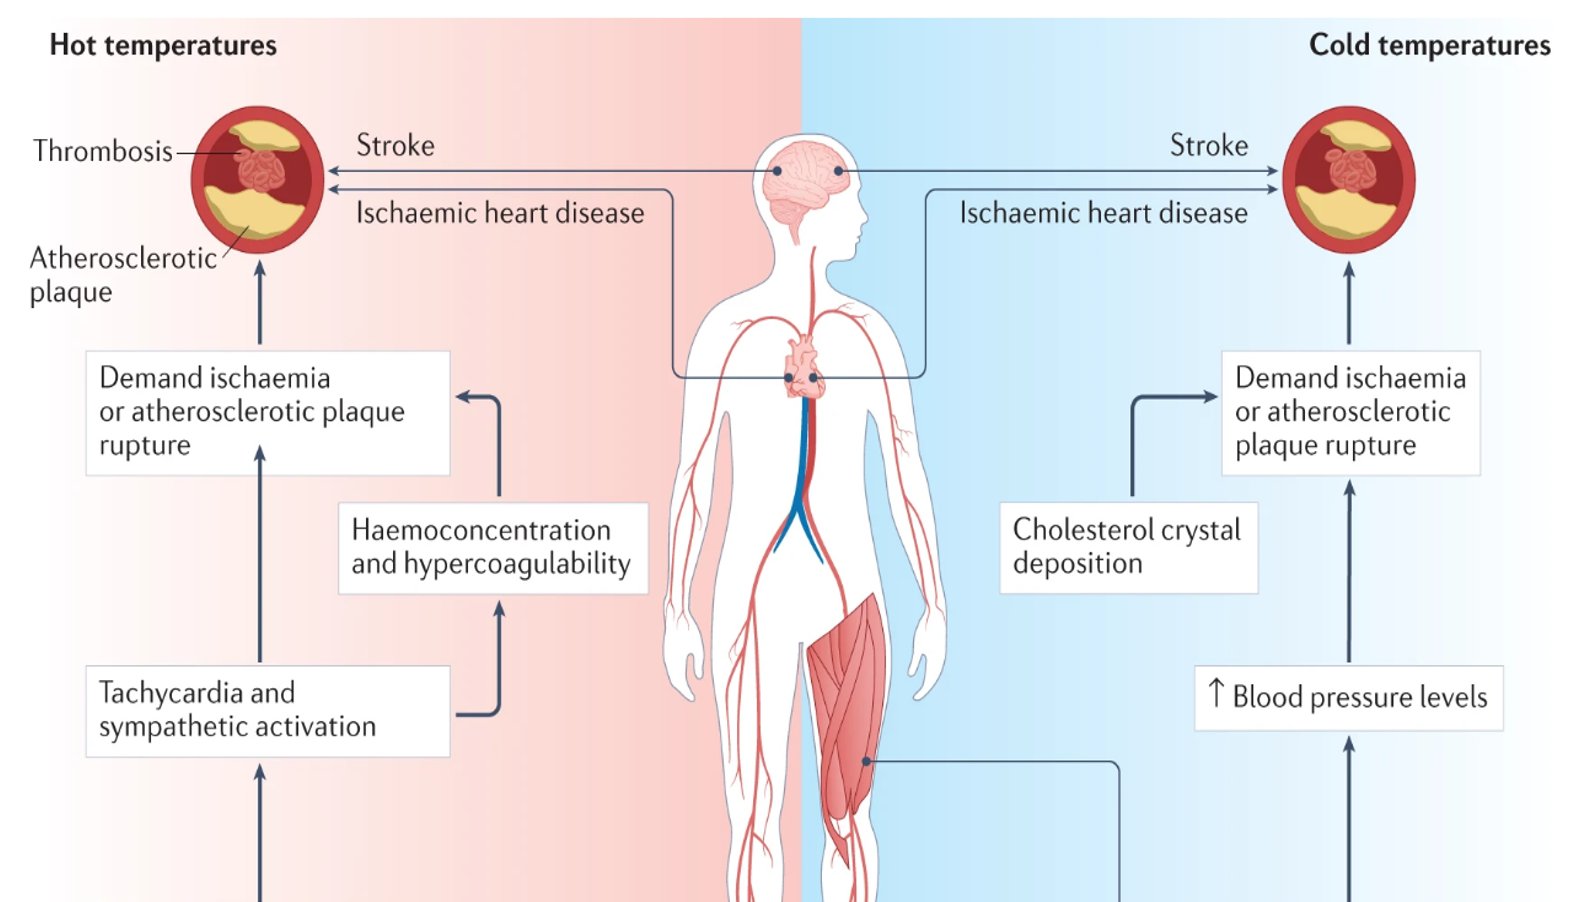 diagram explaining the pathophysiological pathways involved in mediating effects of temperature on cardiovascular disease